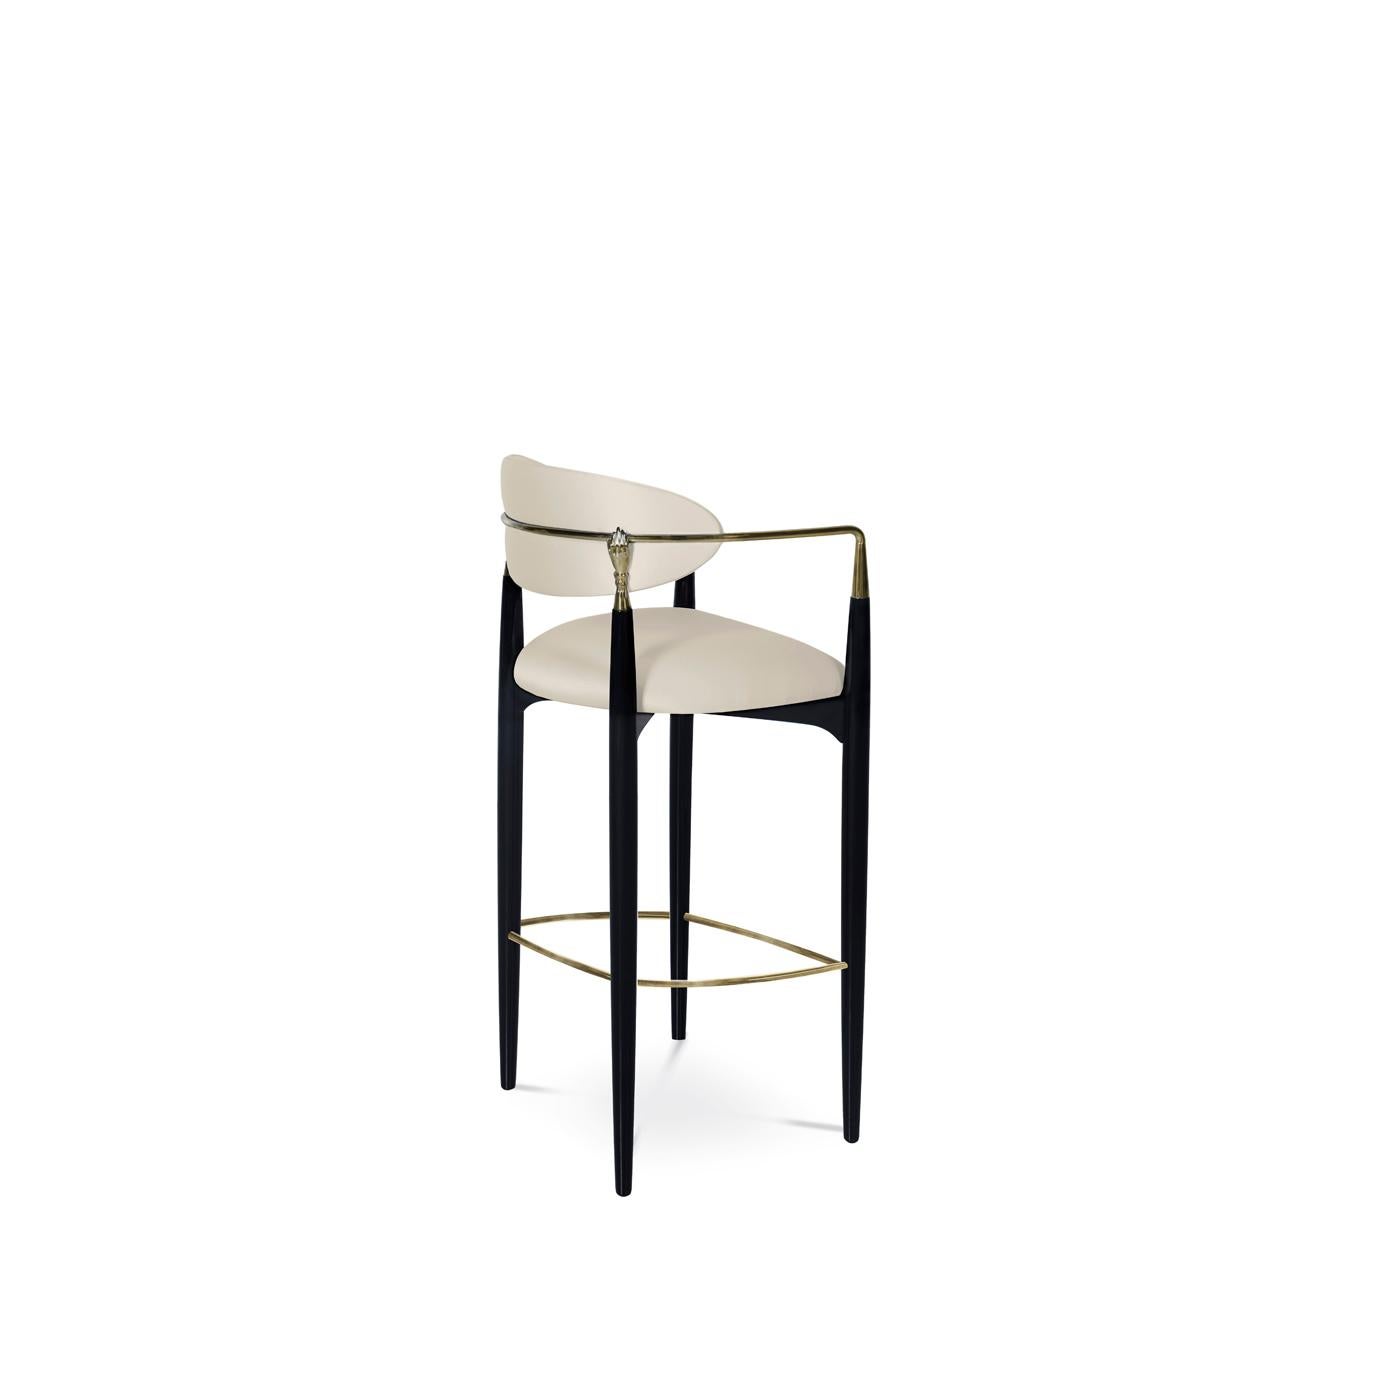 Try not to get handsy with the flirty and modern design of the Nahe´ma bar stool. Her sweet seat and contemporary detached back are bound by a metal and lacquer frame complete with two hand details, insistently grasping at your